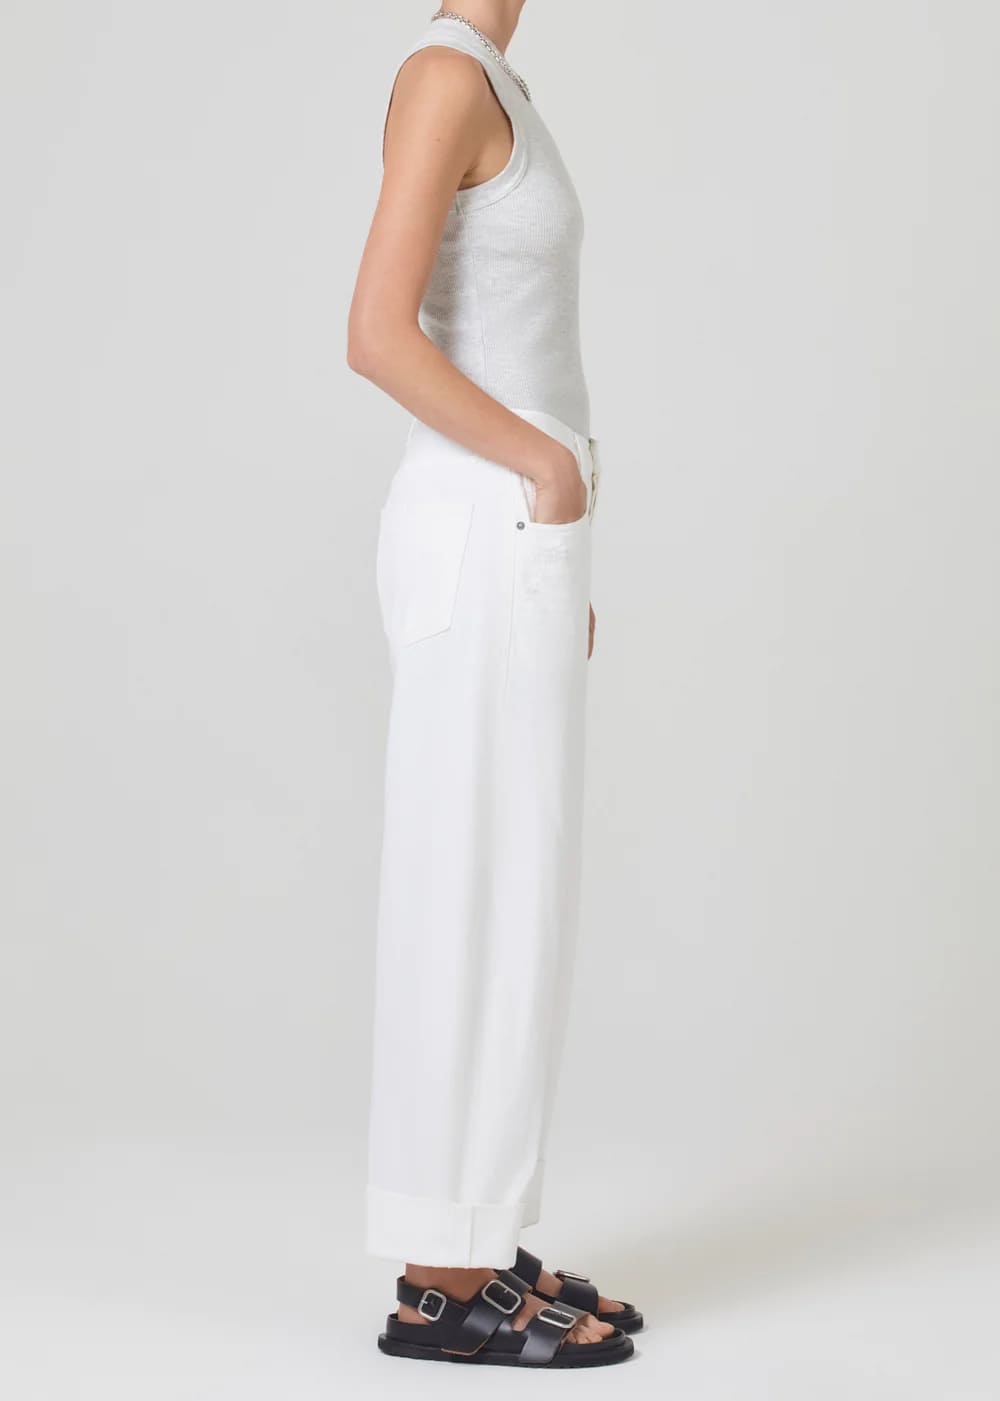 Citizens Of Humanity Ayla Baggy Cuffed Crop Jean in Serene White available at The New Trend Australia.